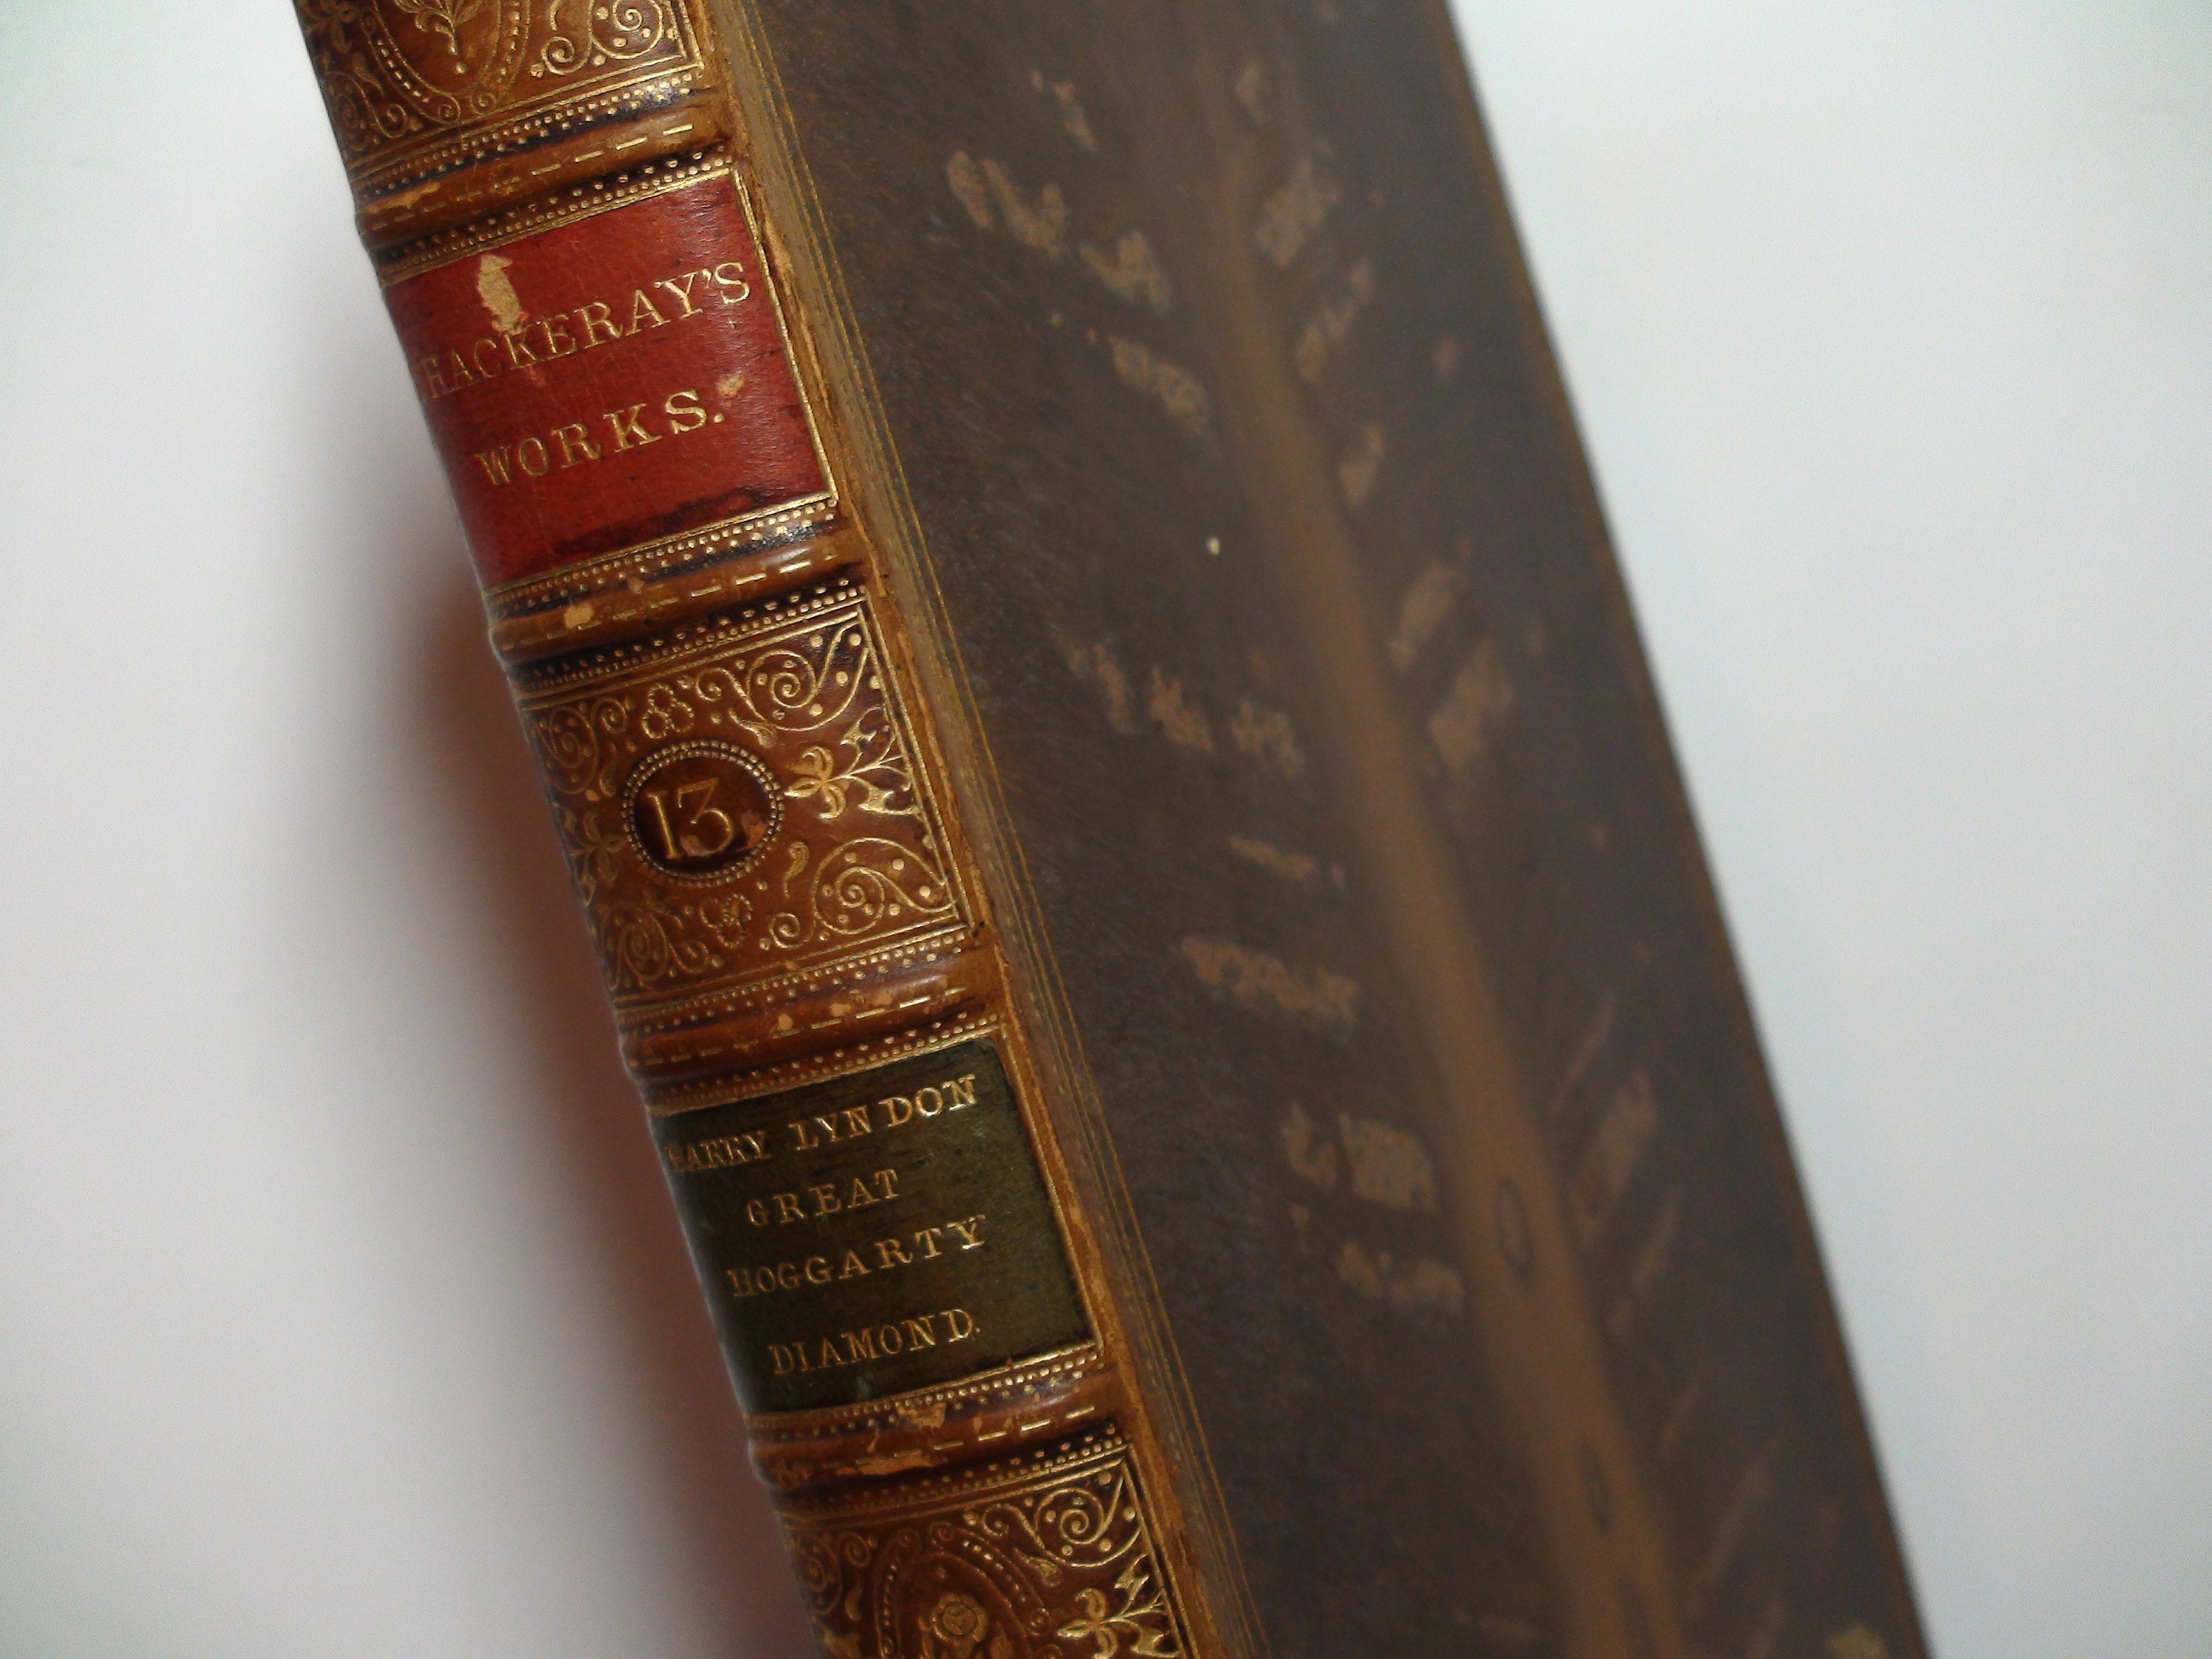 The Works of William M. Thackeray, Maestro Bound in Fine Leather, 1st Collected Edition, Illustrated, 1869